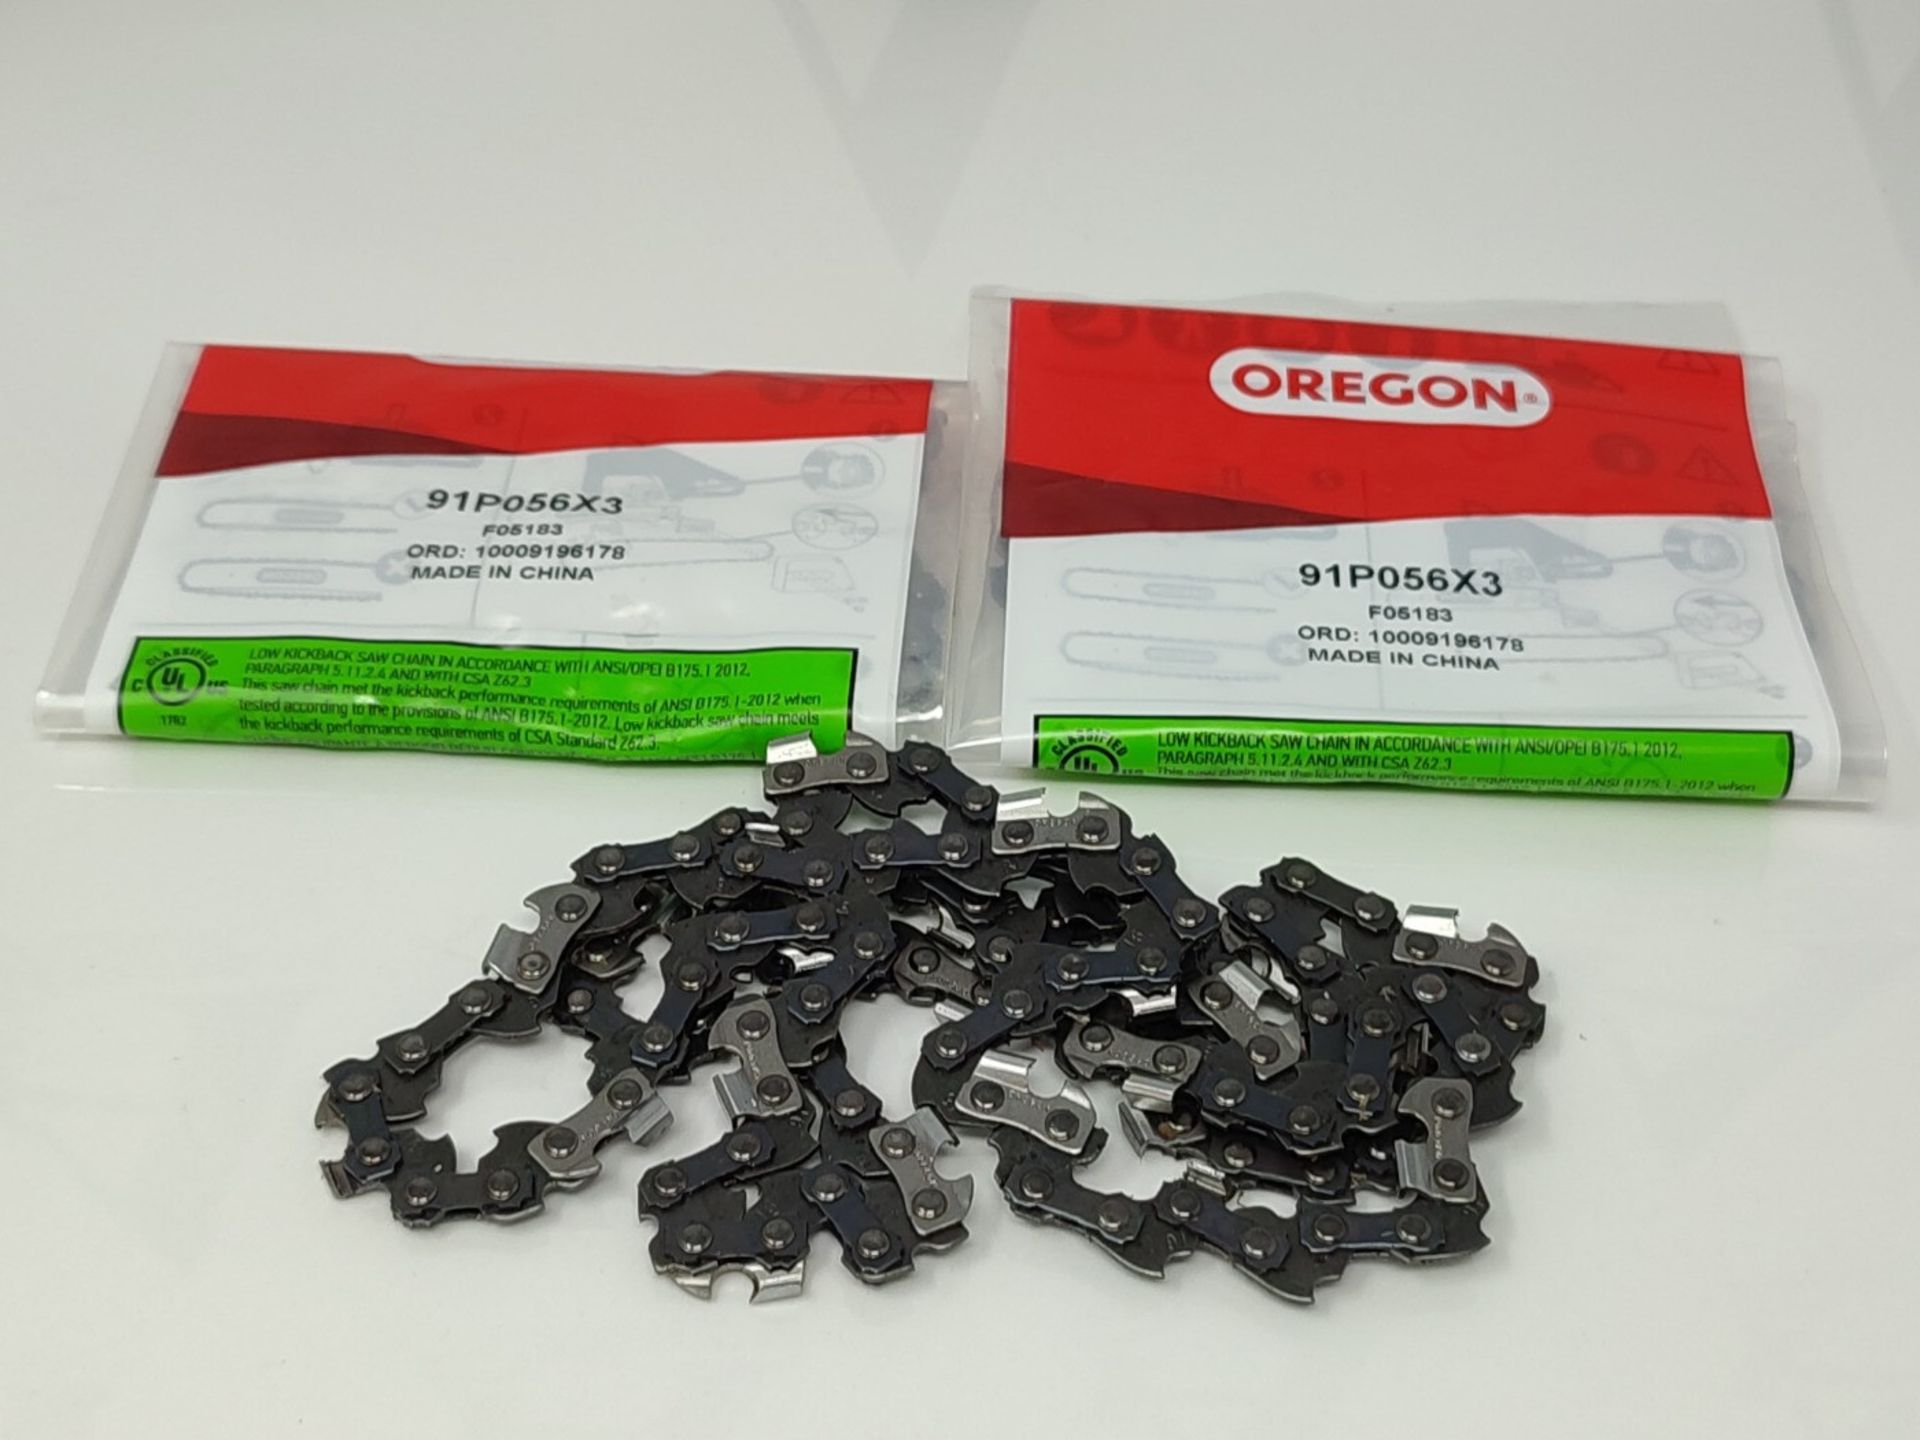 Oregon Chainsaw Chain for 16-Inch (40 cm) Bar -56 Drive Links  low-kickback chain f - Image 2 of 2